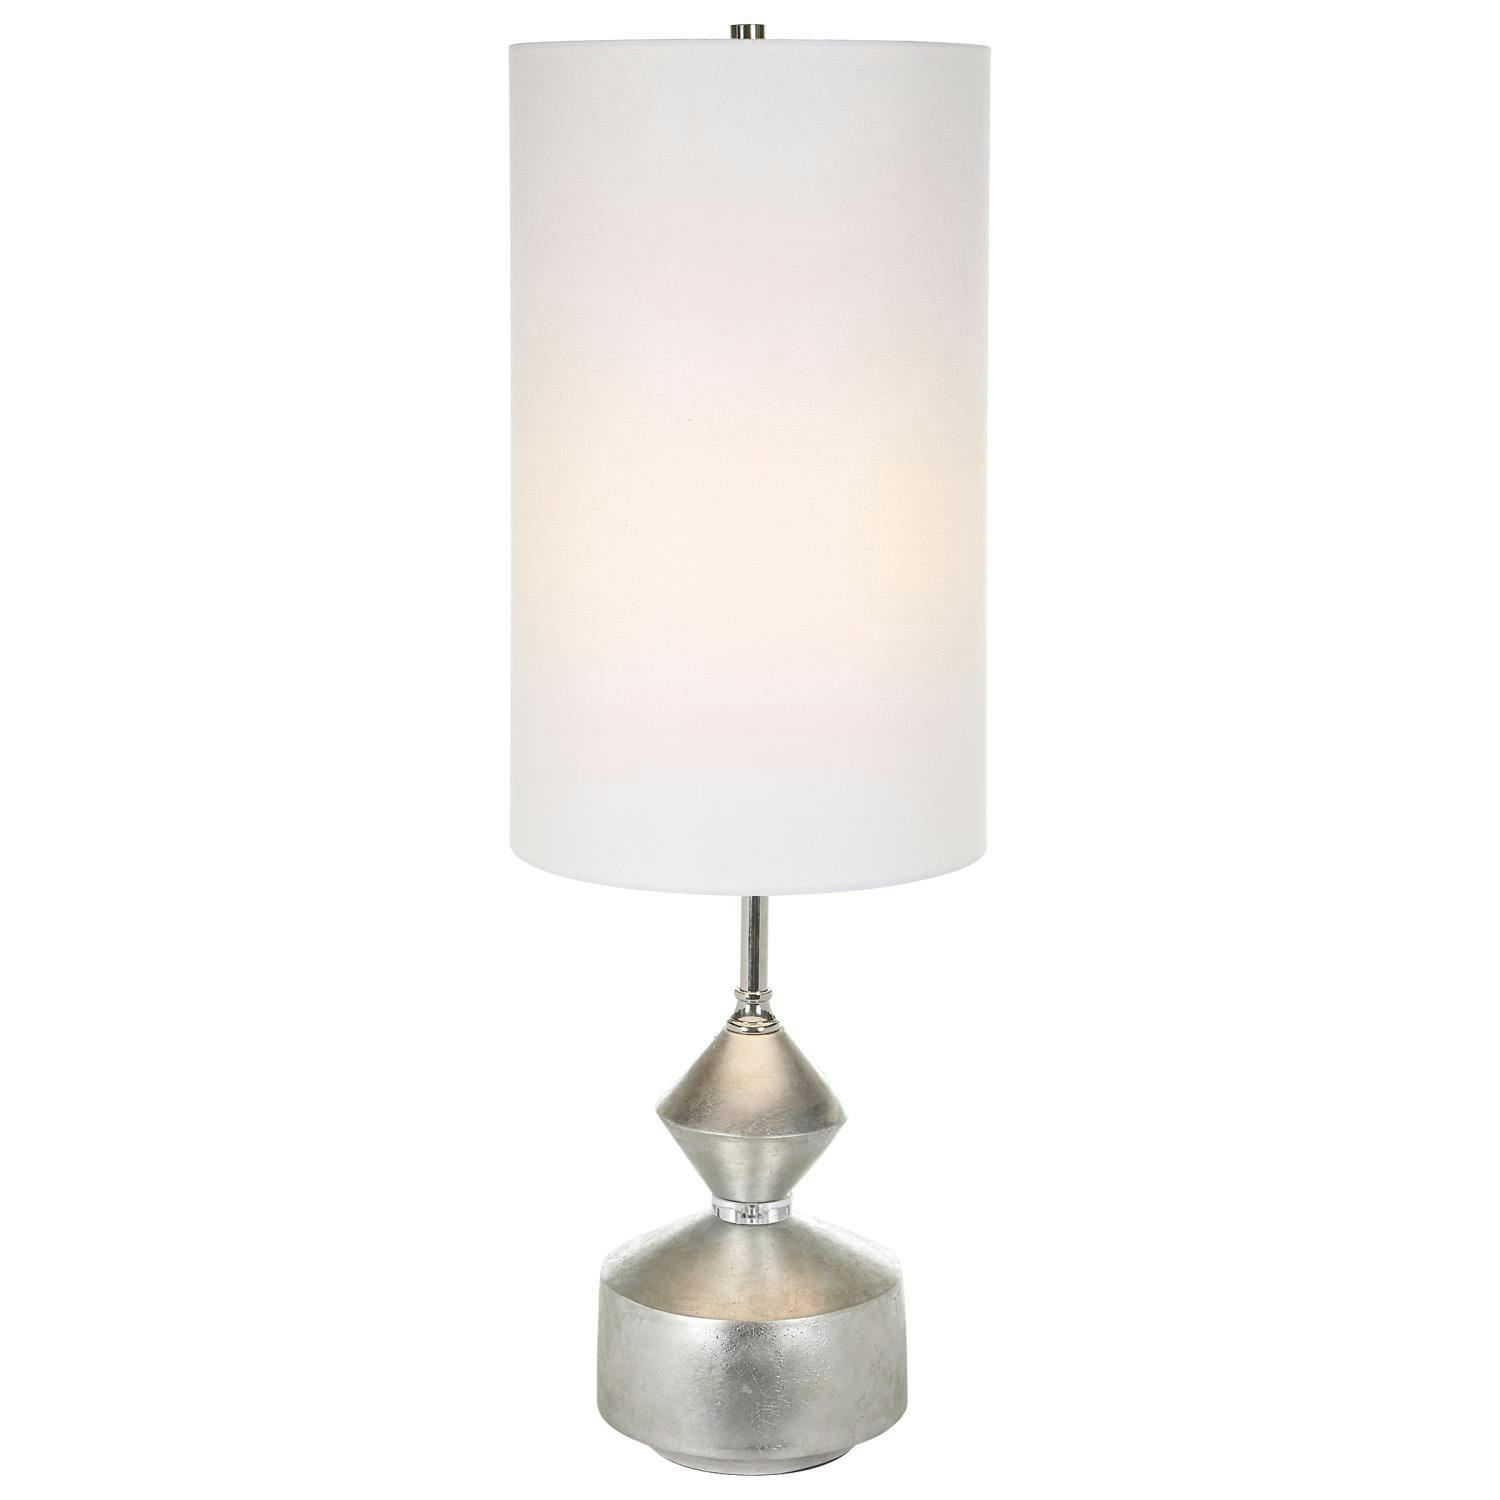 Warm Silver Leaf Geometric Buffet Lamp with White Linen Shade